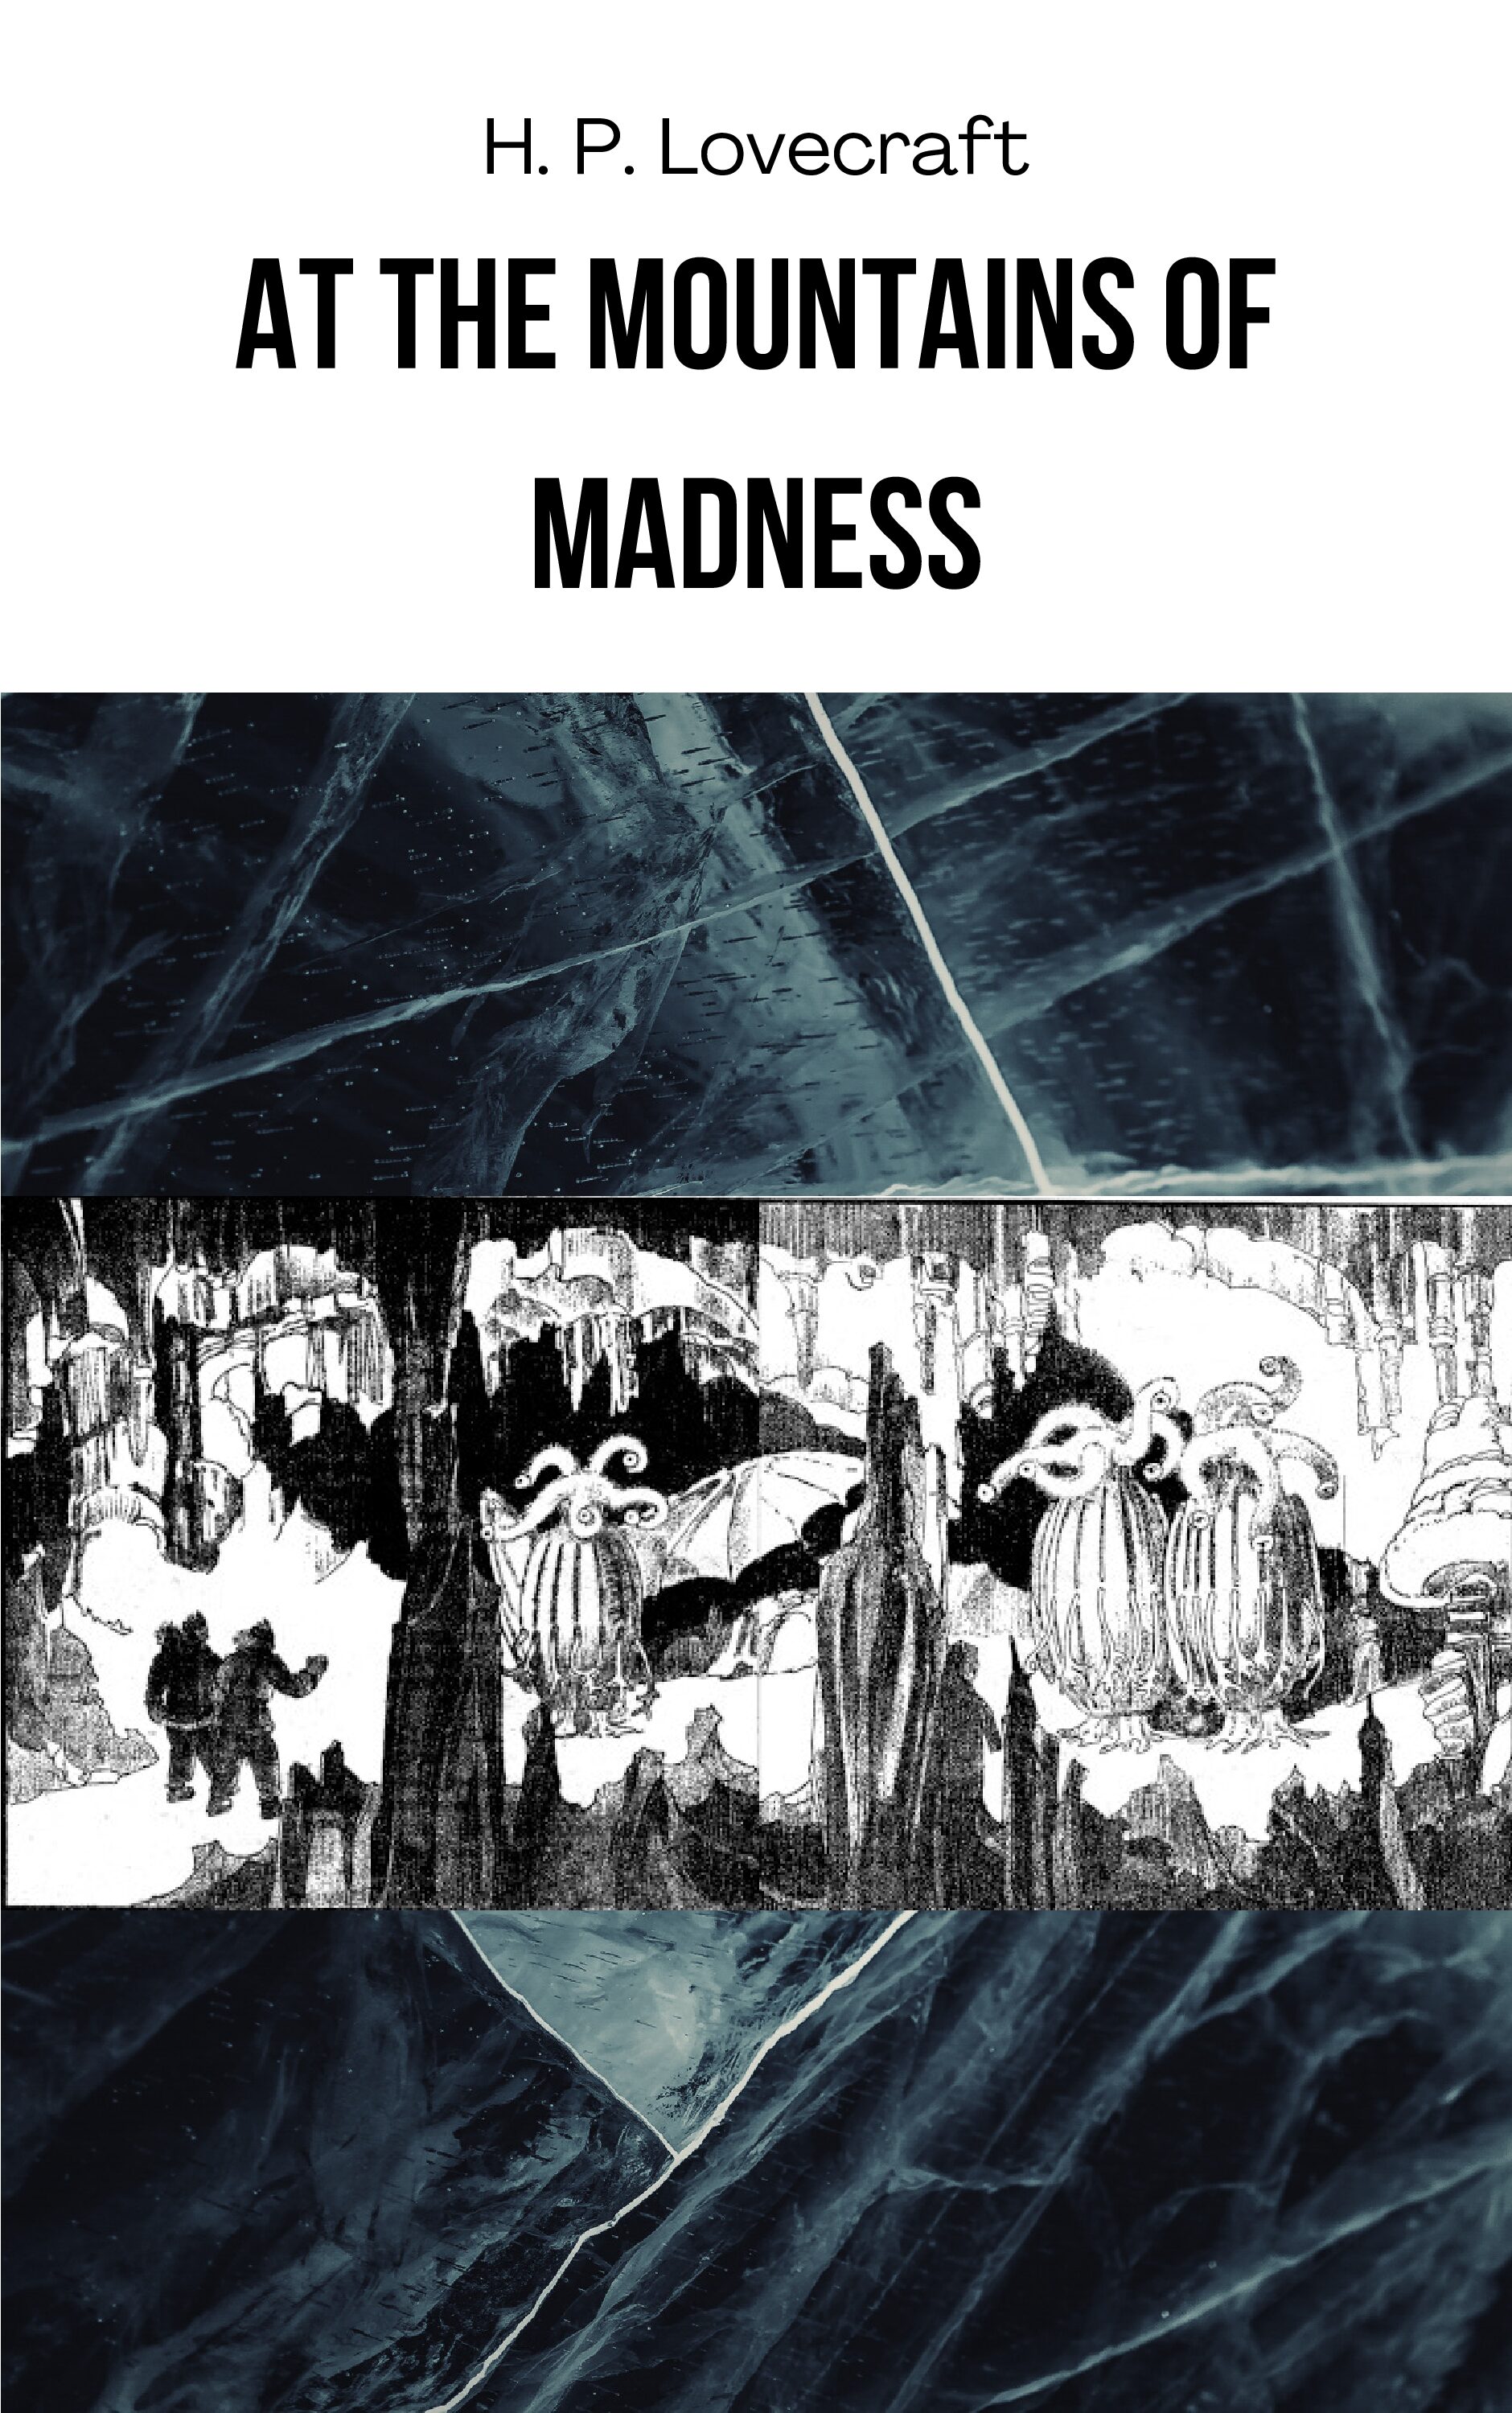 Book Cover: At the mountains of madness